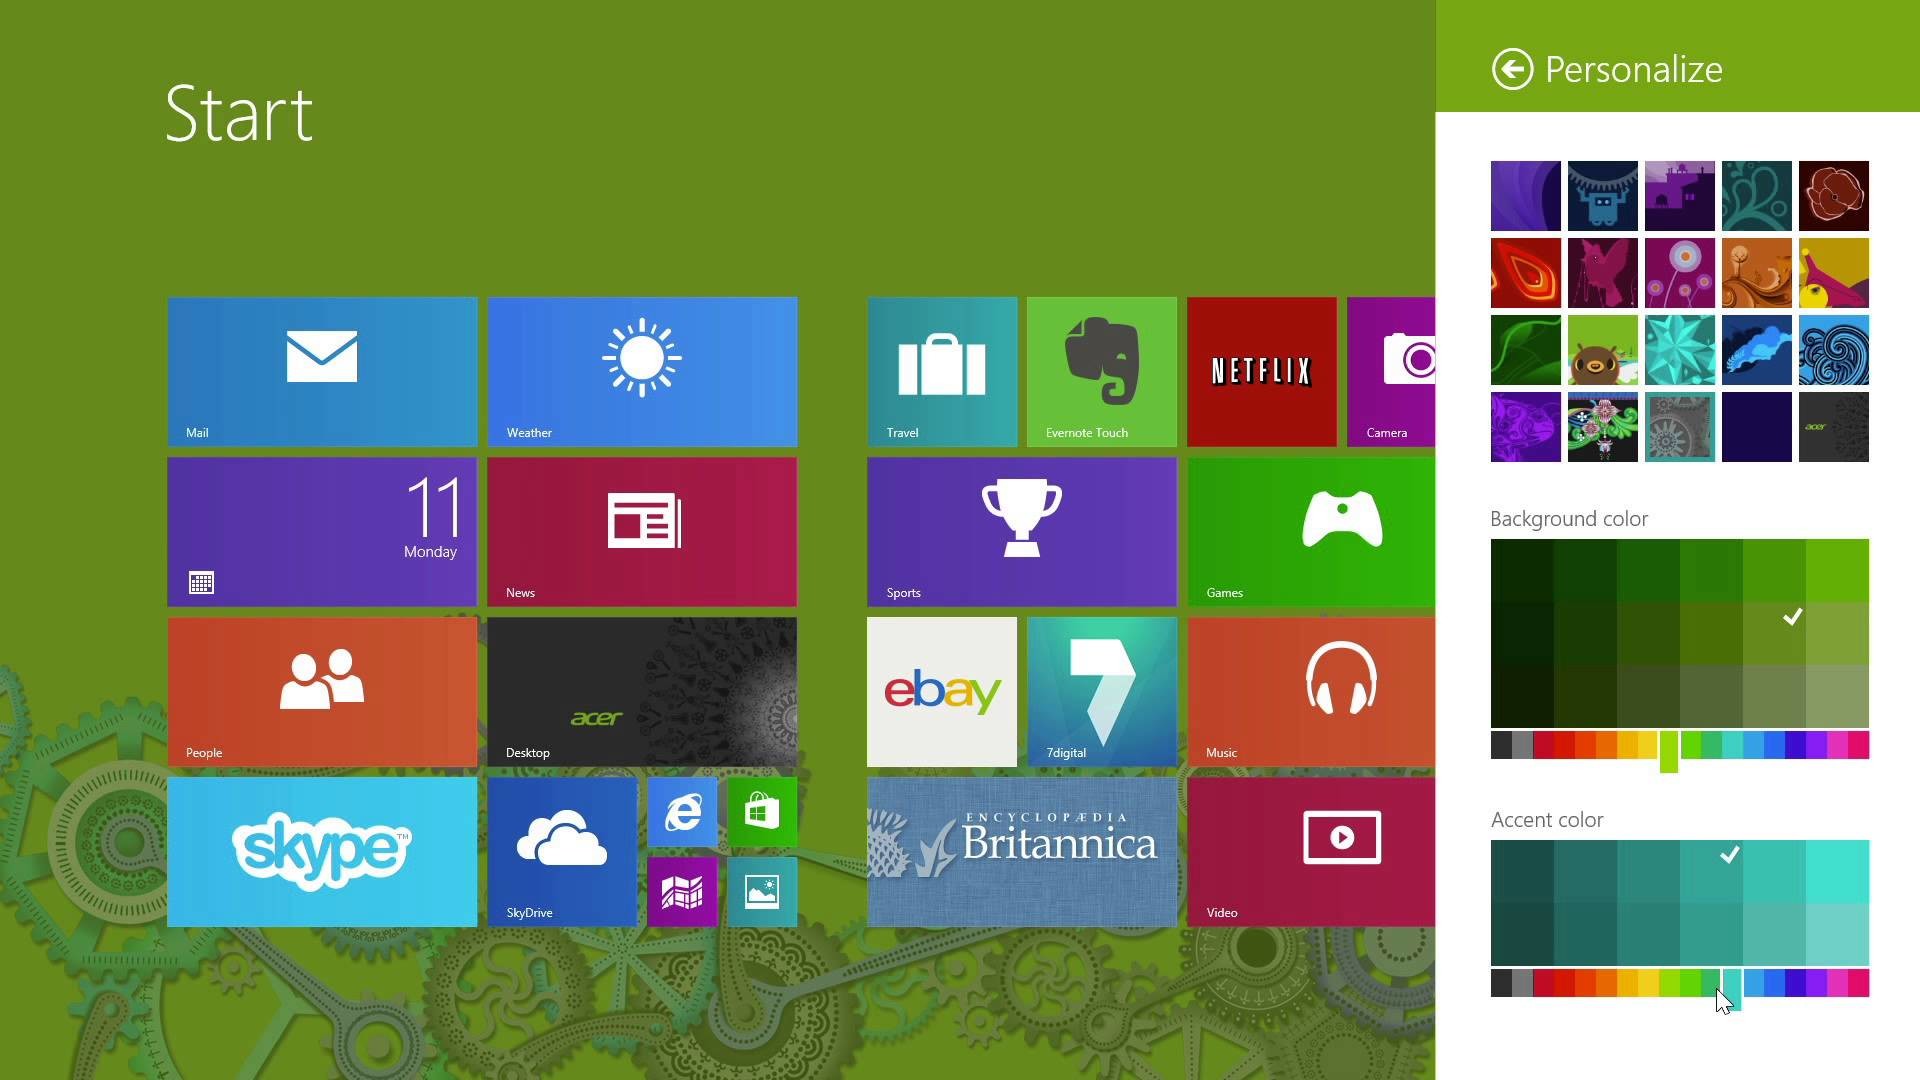 1920x1080 Windows 8.1 - How to Change the Start Screen Background - YouTube